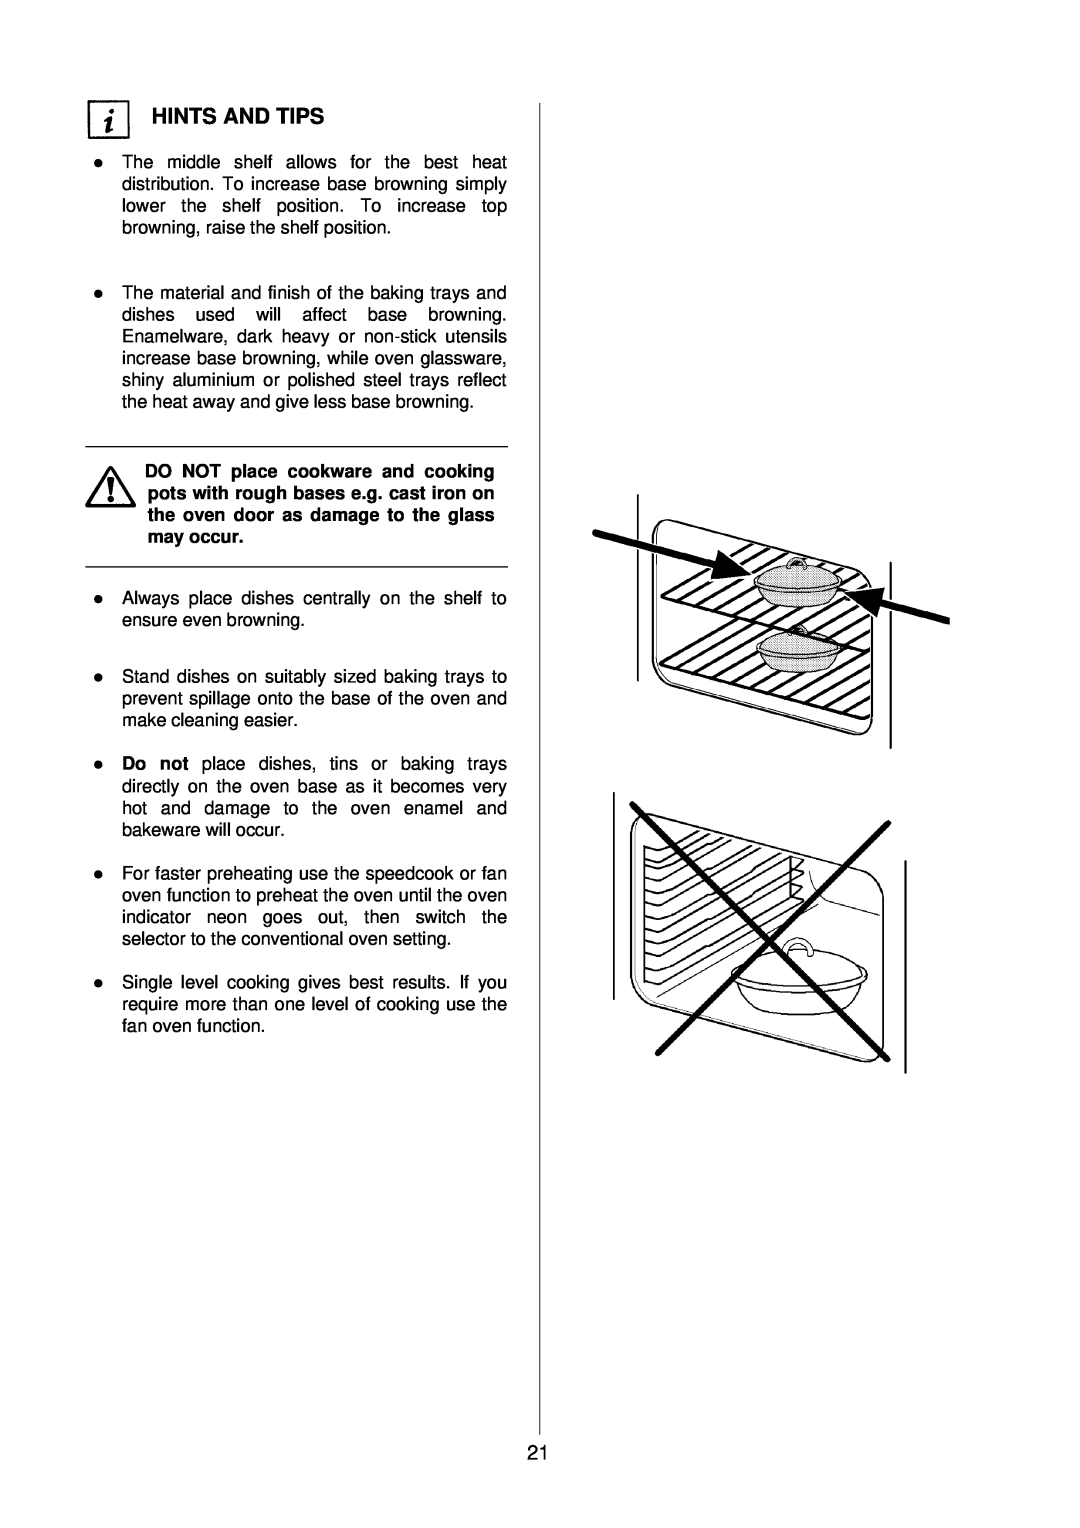 Electrolux D4100-1 operating instructions Hints And Tips, l browning, raise the shelf position 